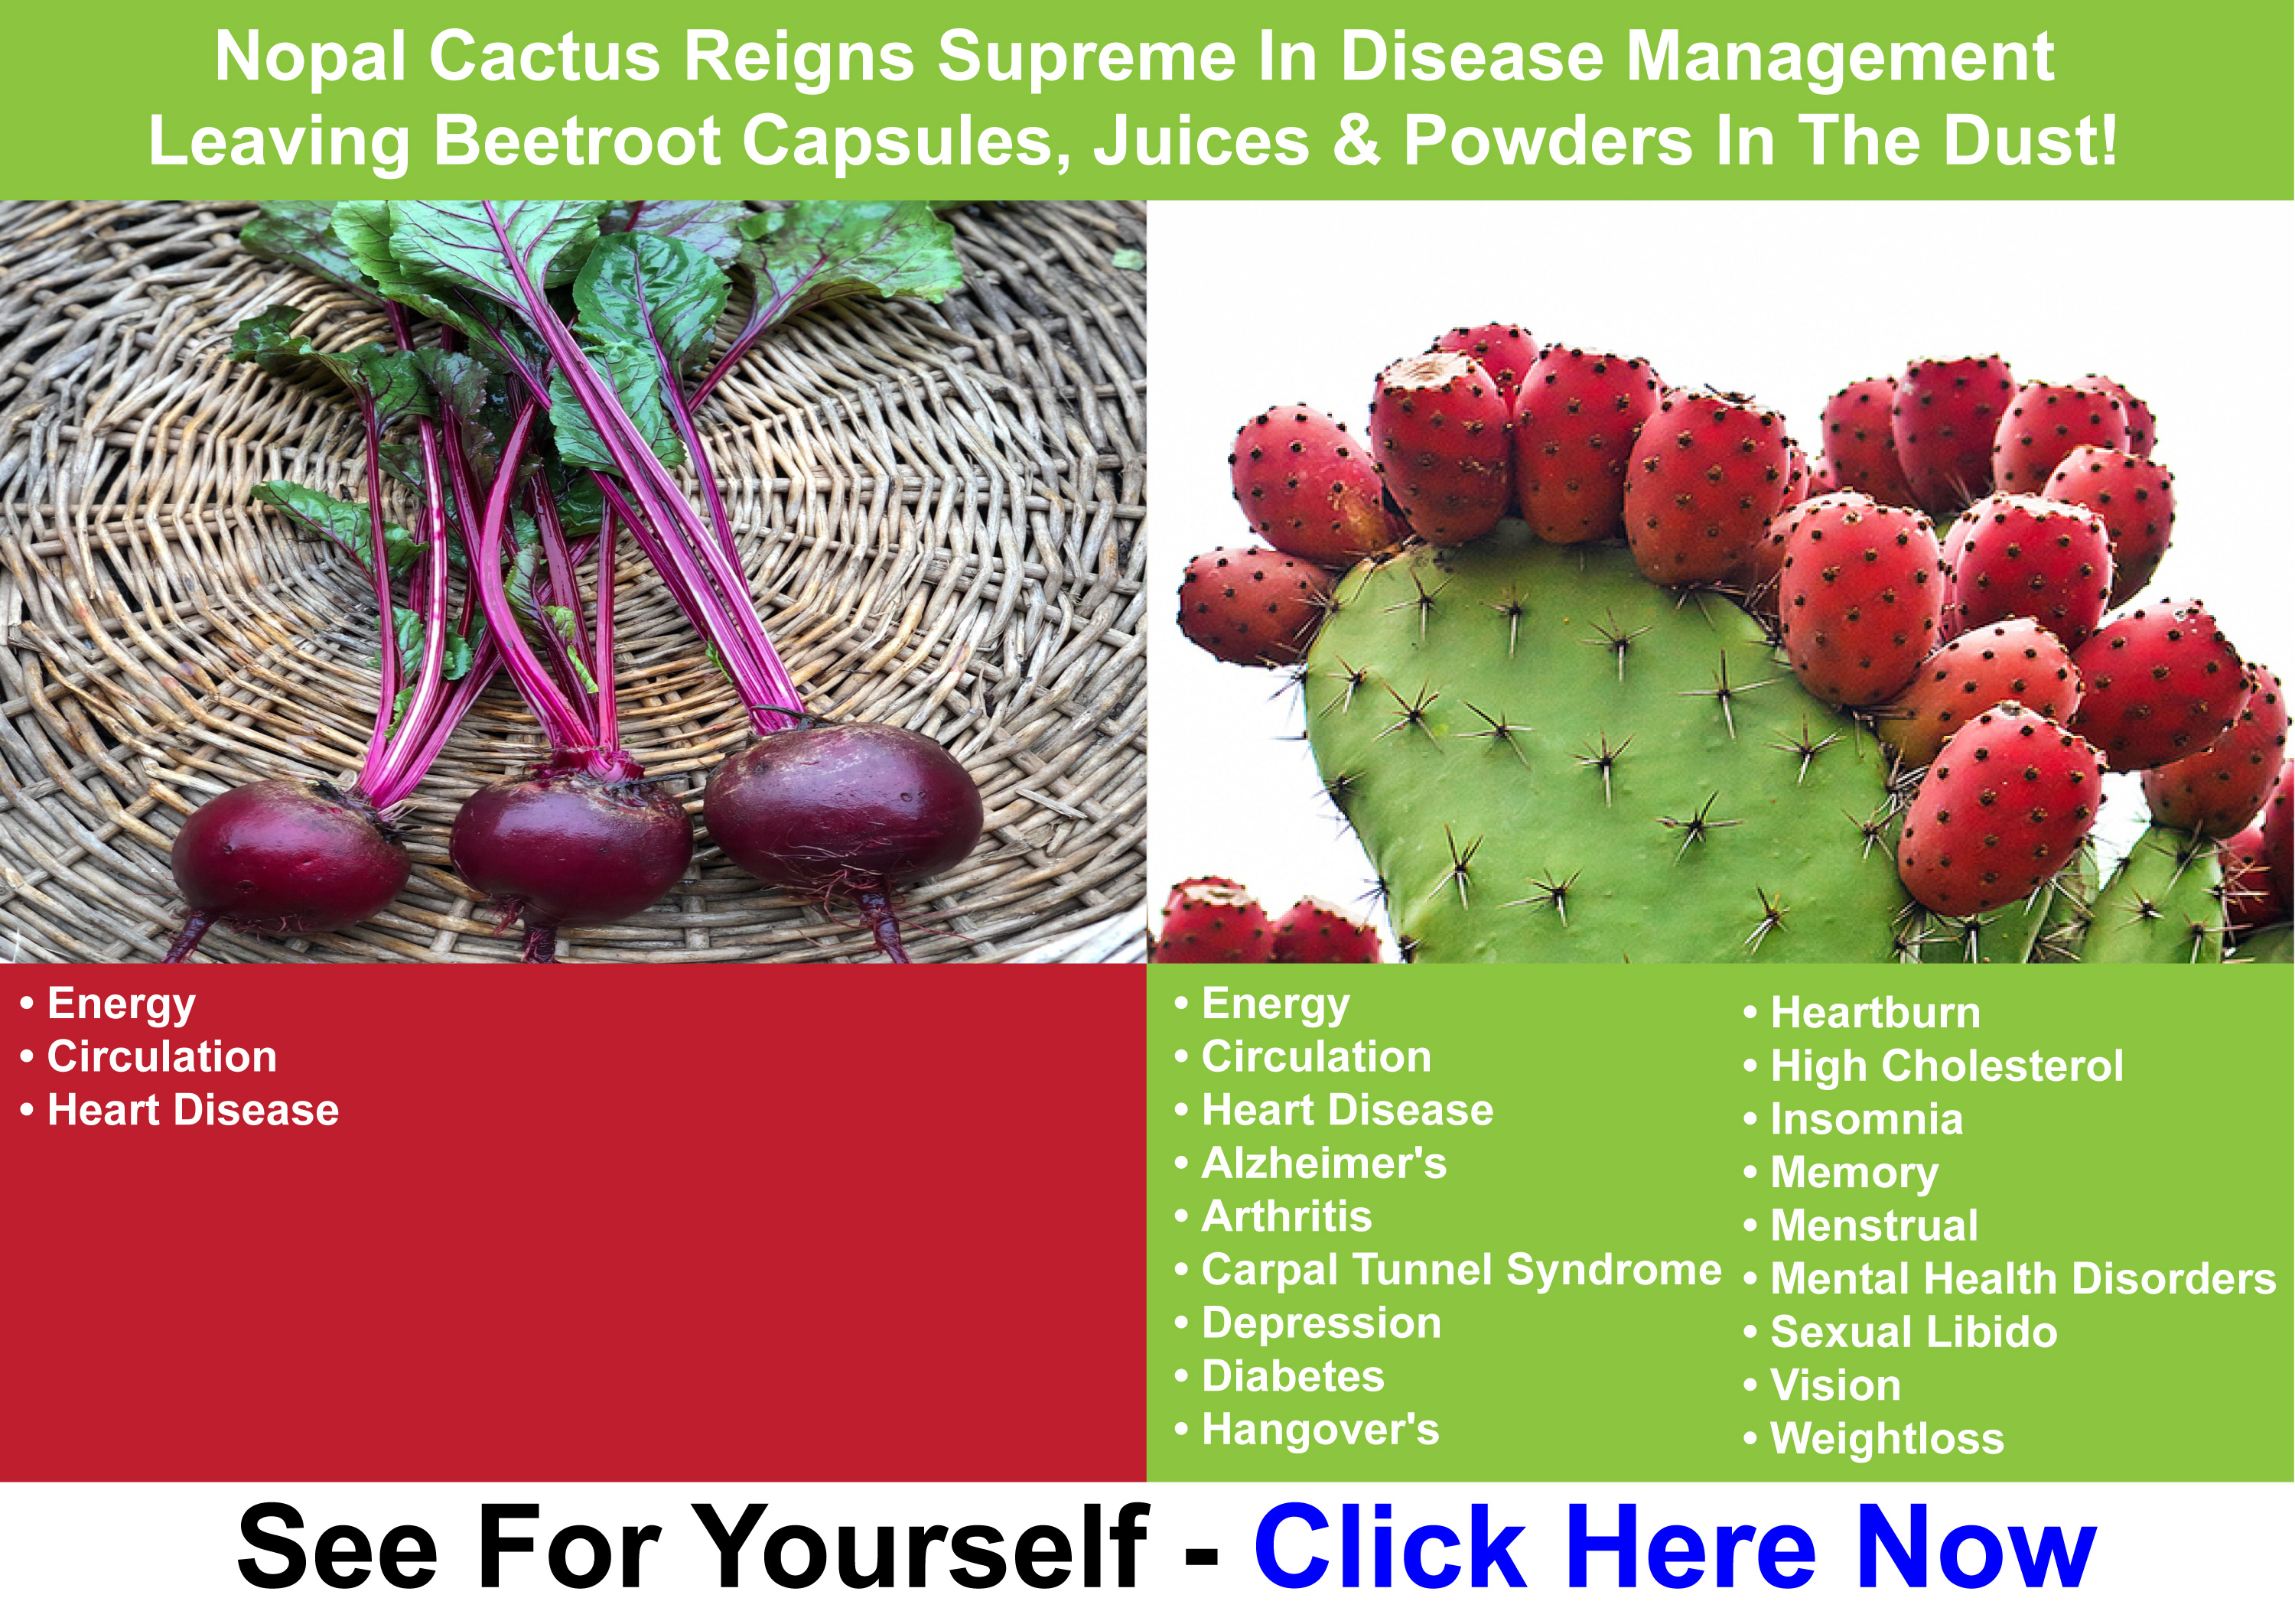 Nopal Cactus Reigns Supreme In Disease Management, Leaving Beetroot Products In The Dust!